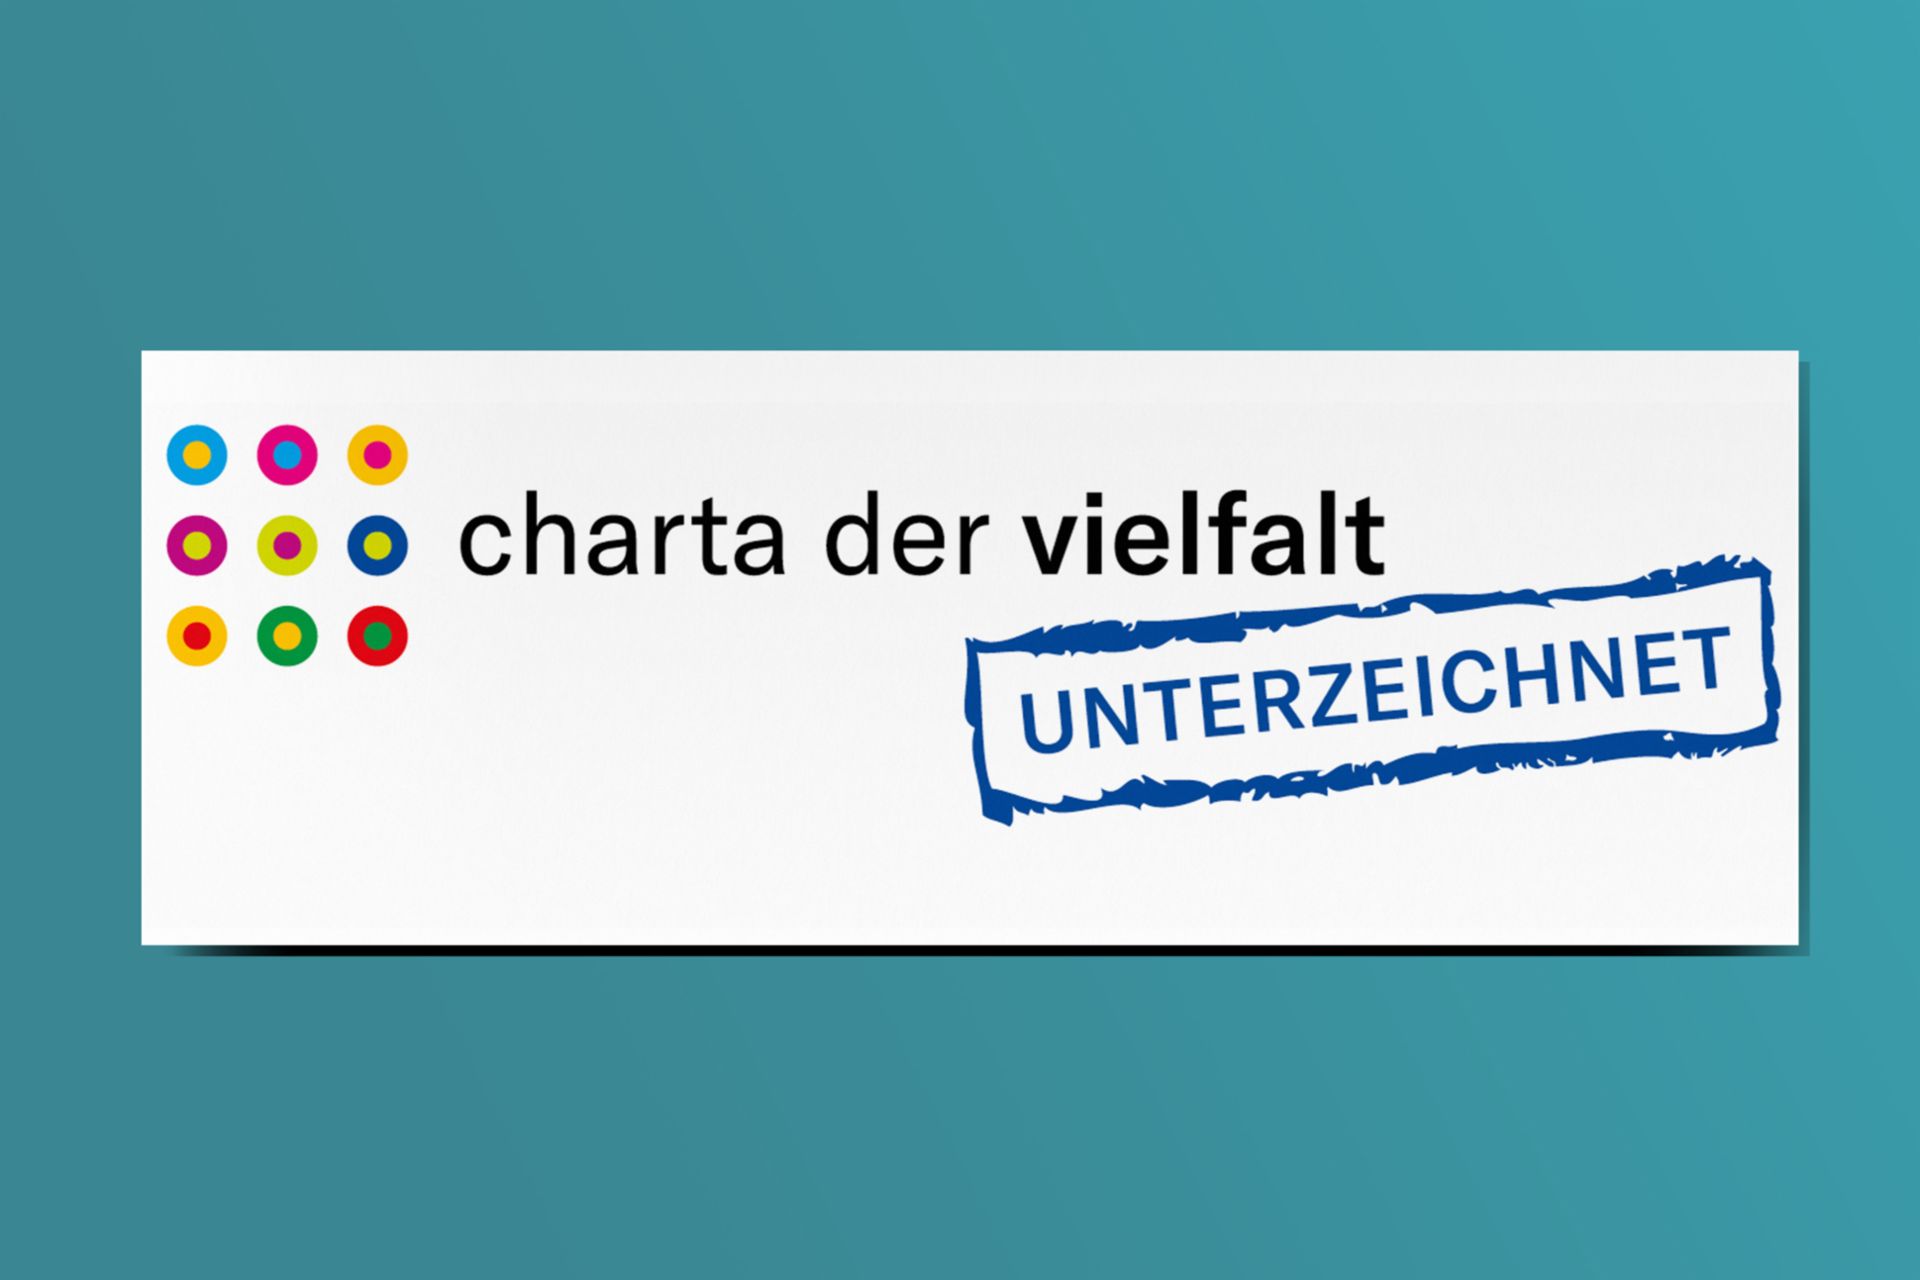 The Charta der Vielfalt is a corporate initiative to promote diversity in companies and institutions. TRATON is a signatory and member of the Charta der Vielfalt – for recognition, appreciation and inclusion of diversity in the culture of German companies.